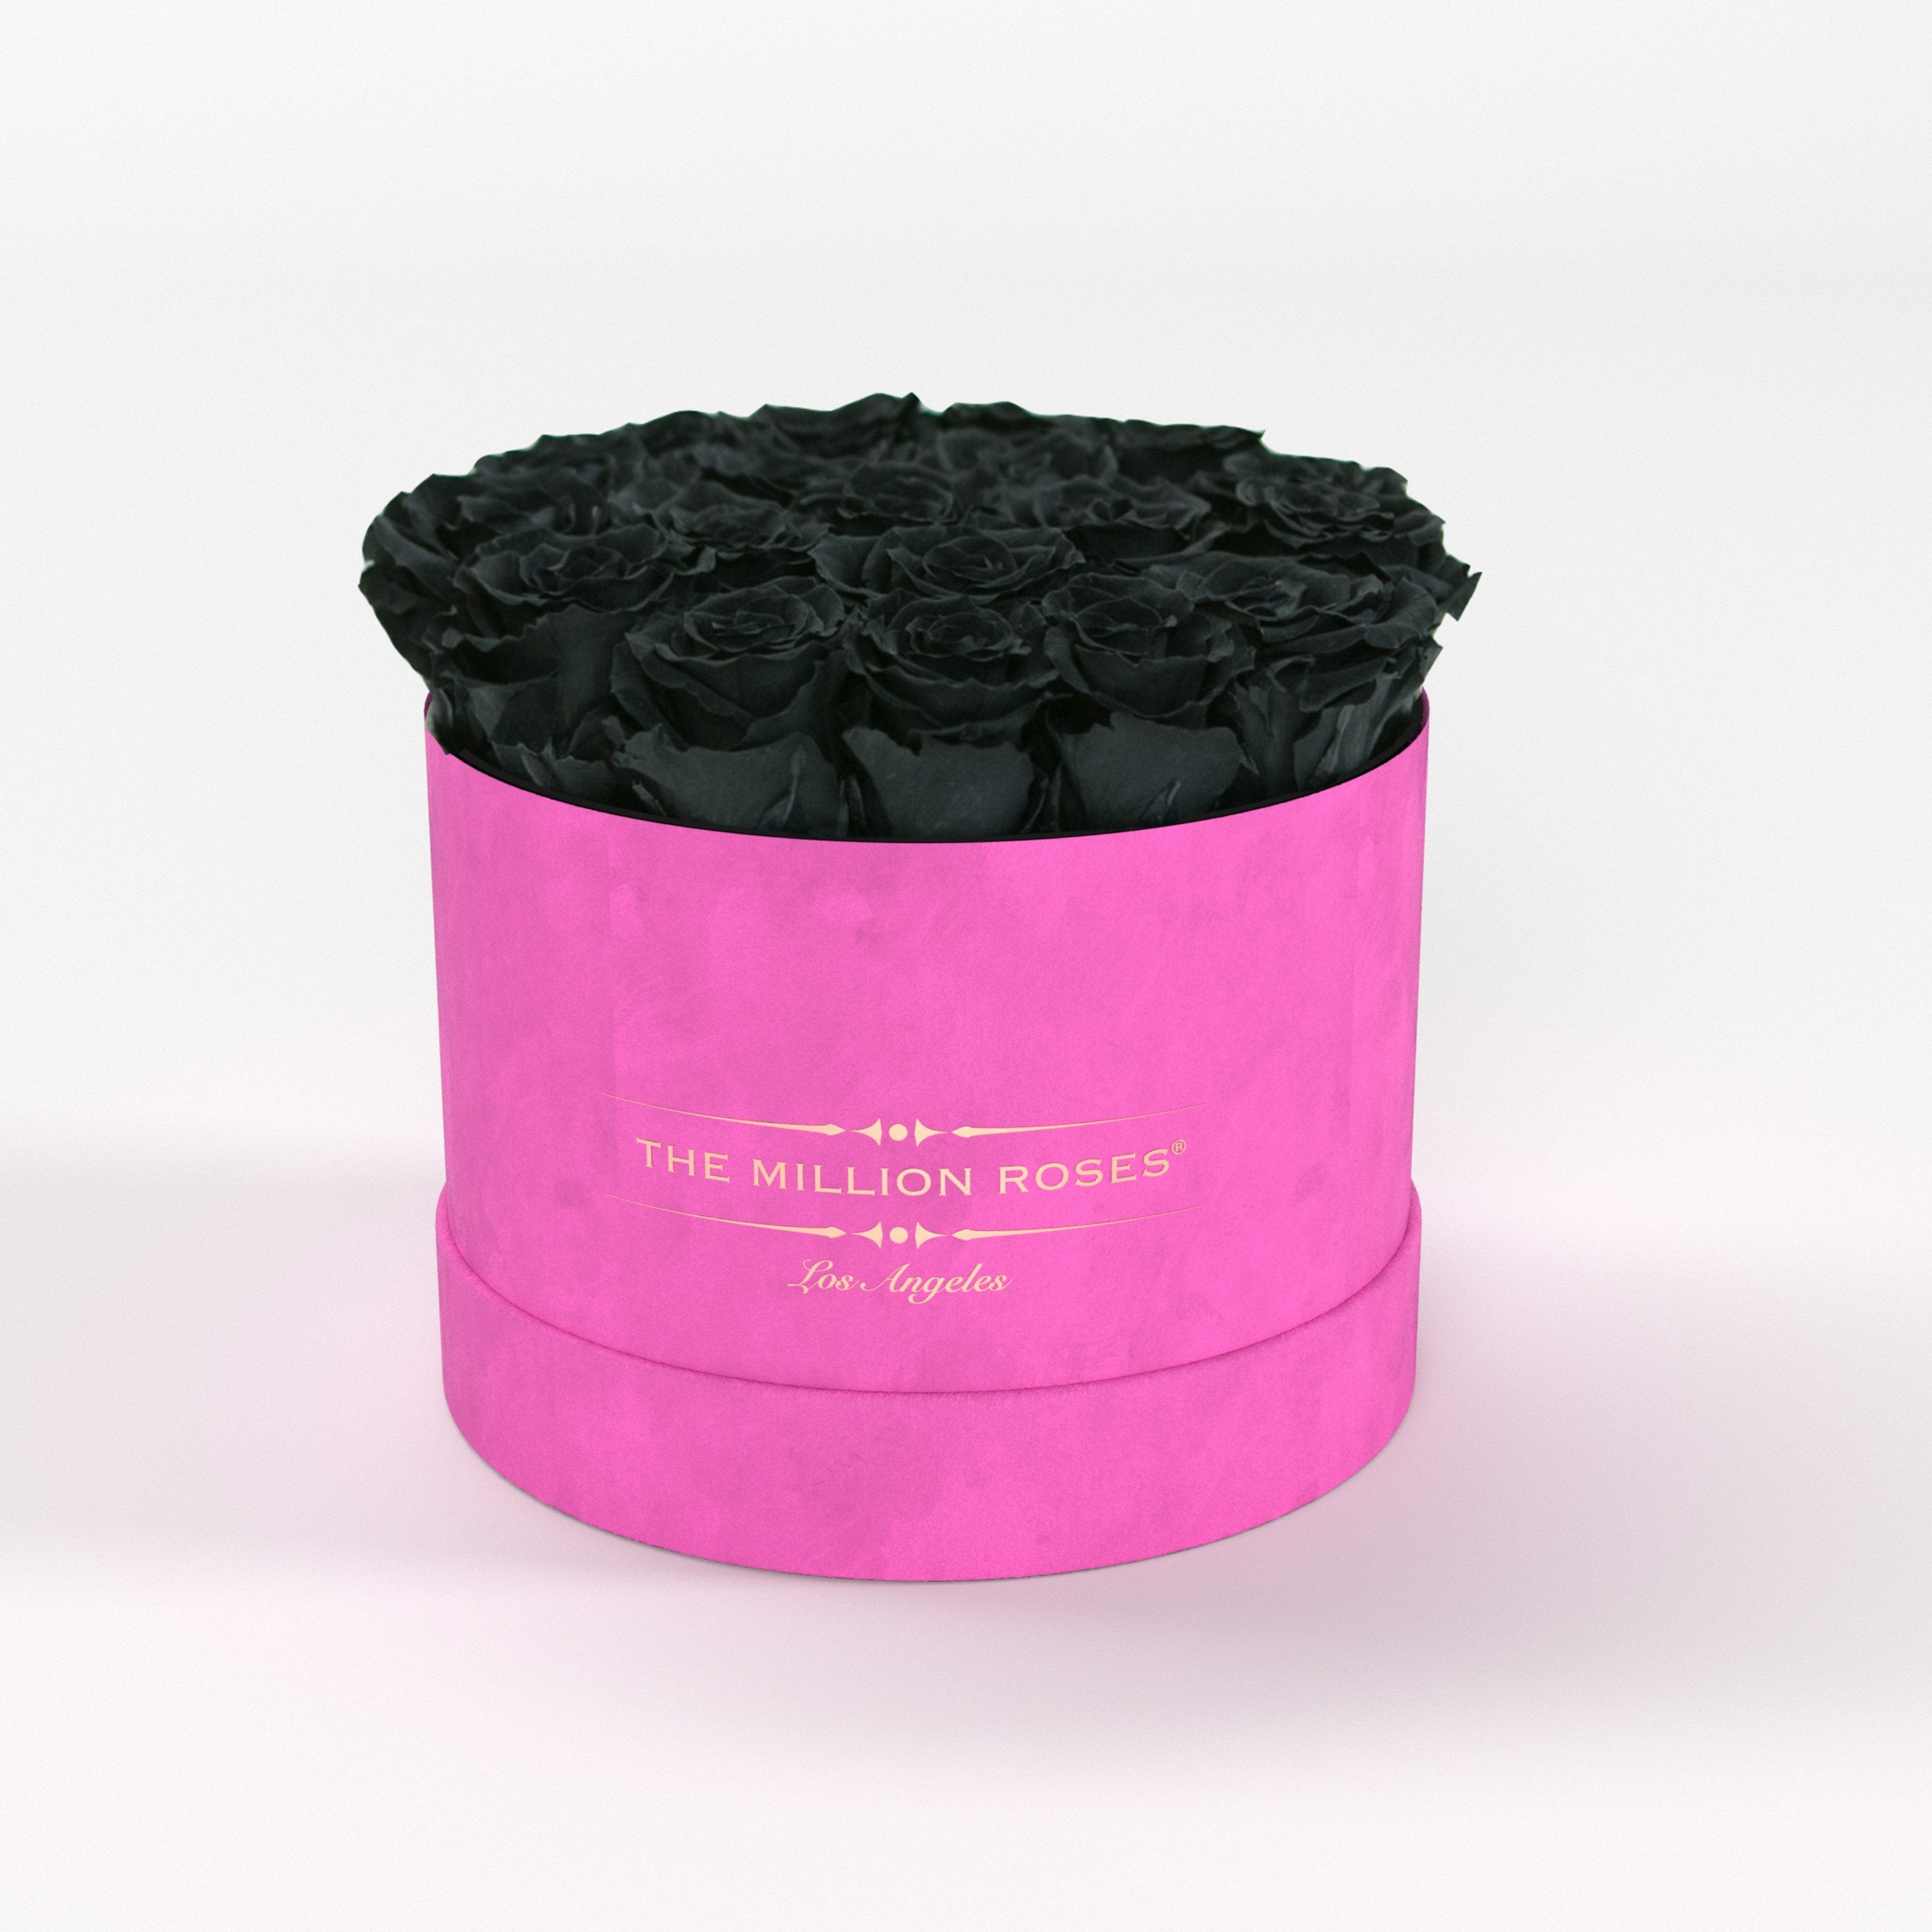 ( LA ) Hot Pink - Suede - Classic Box with Black Roses Kit - the million roses